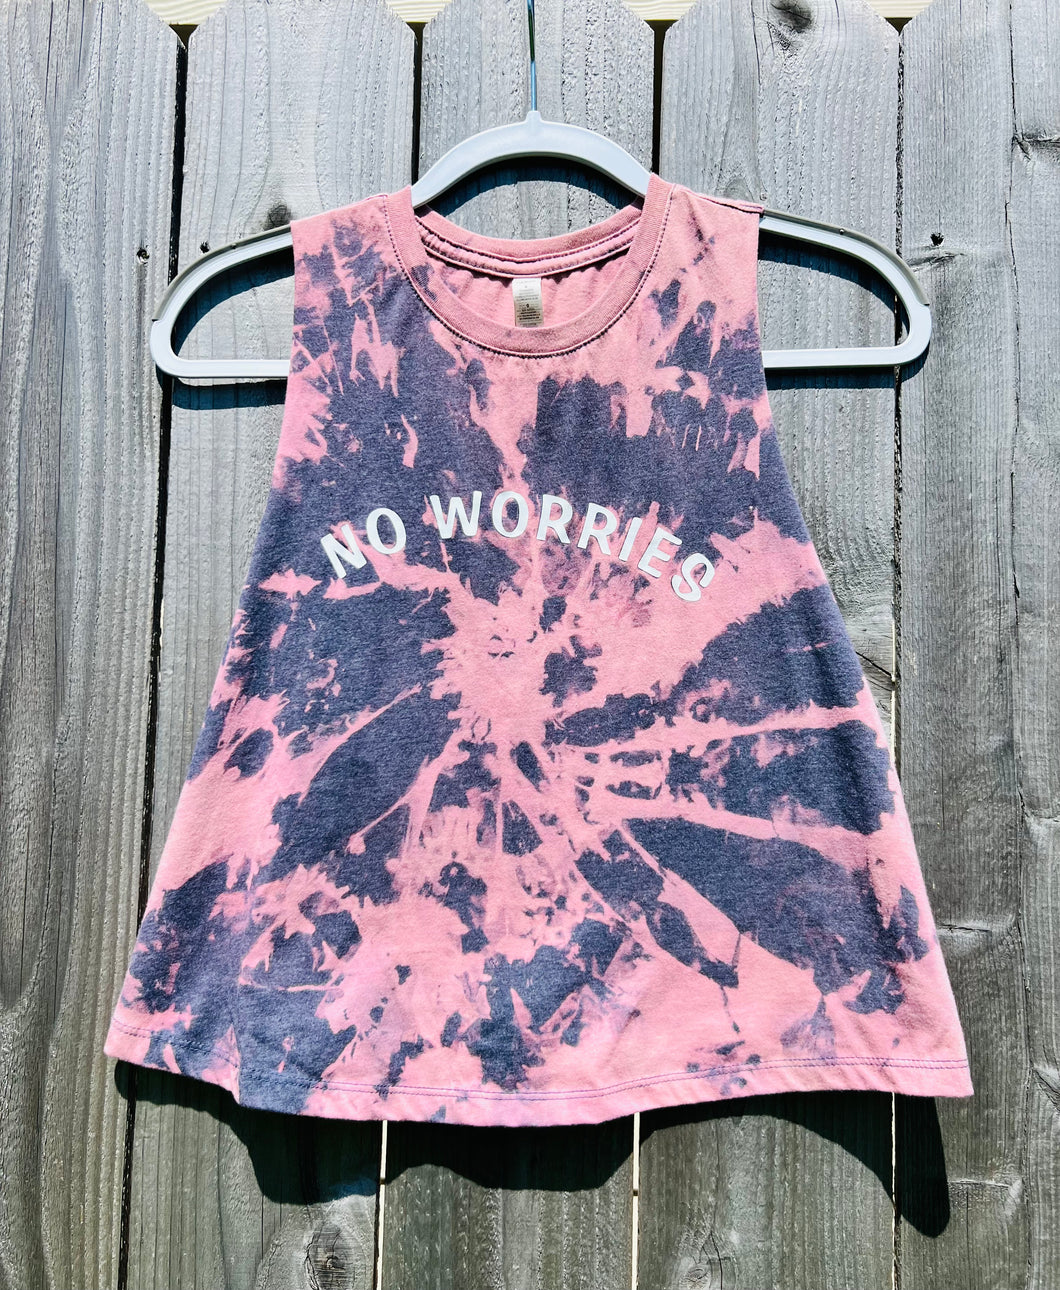 Uniquely dyed one of a kind tank top